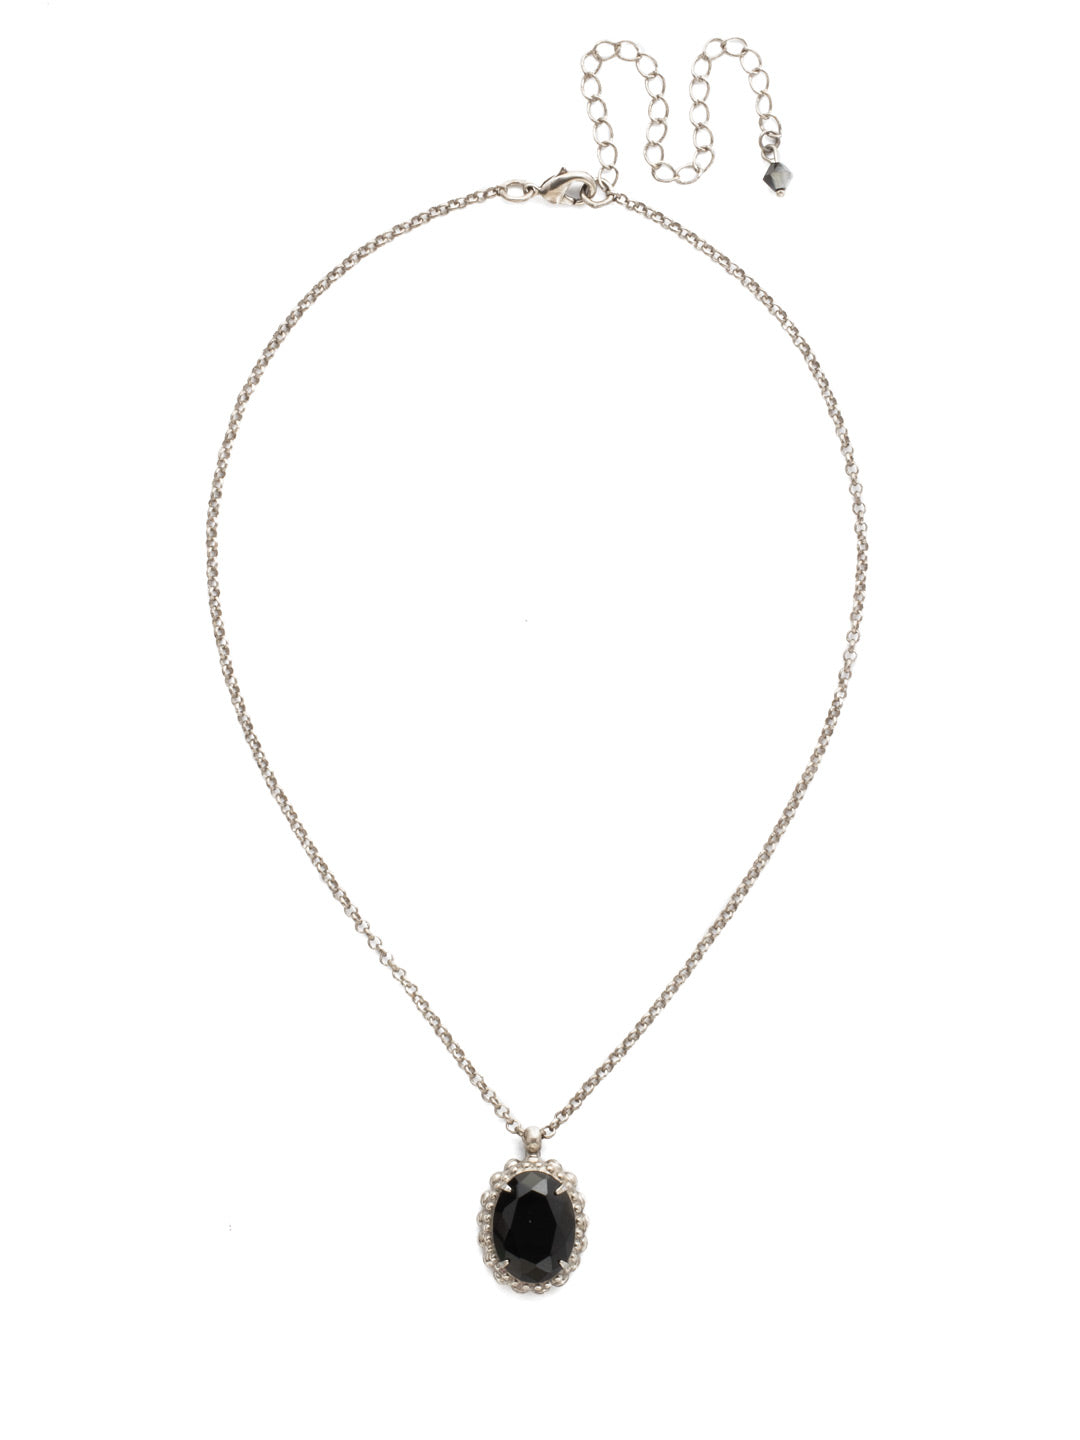 Camellia Pendant Necklace - NDQ7ASBON - A large crystal oval with decorative metal edging adds the perfect finishing touch to your look. From Sorrelli's Black Onyx collection in our Antique Silver-tone finish.